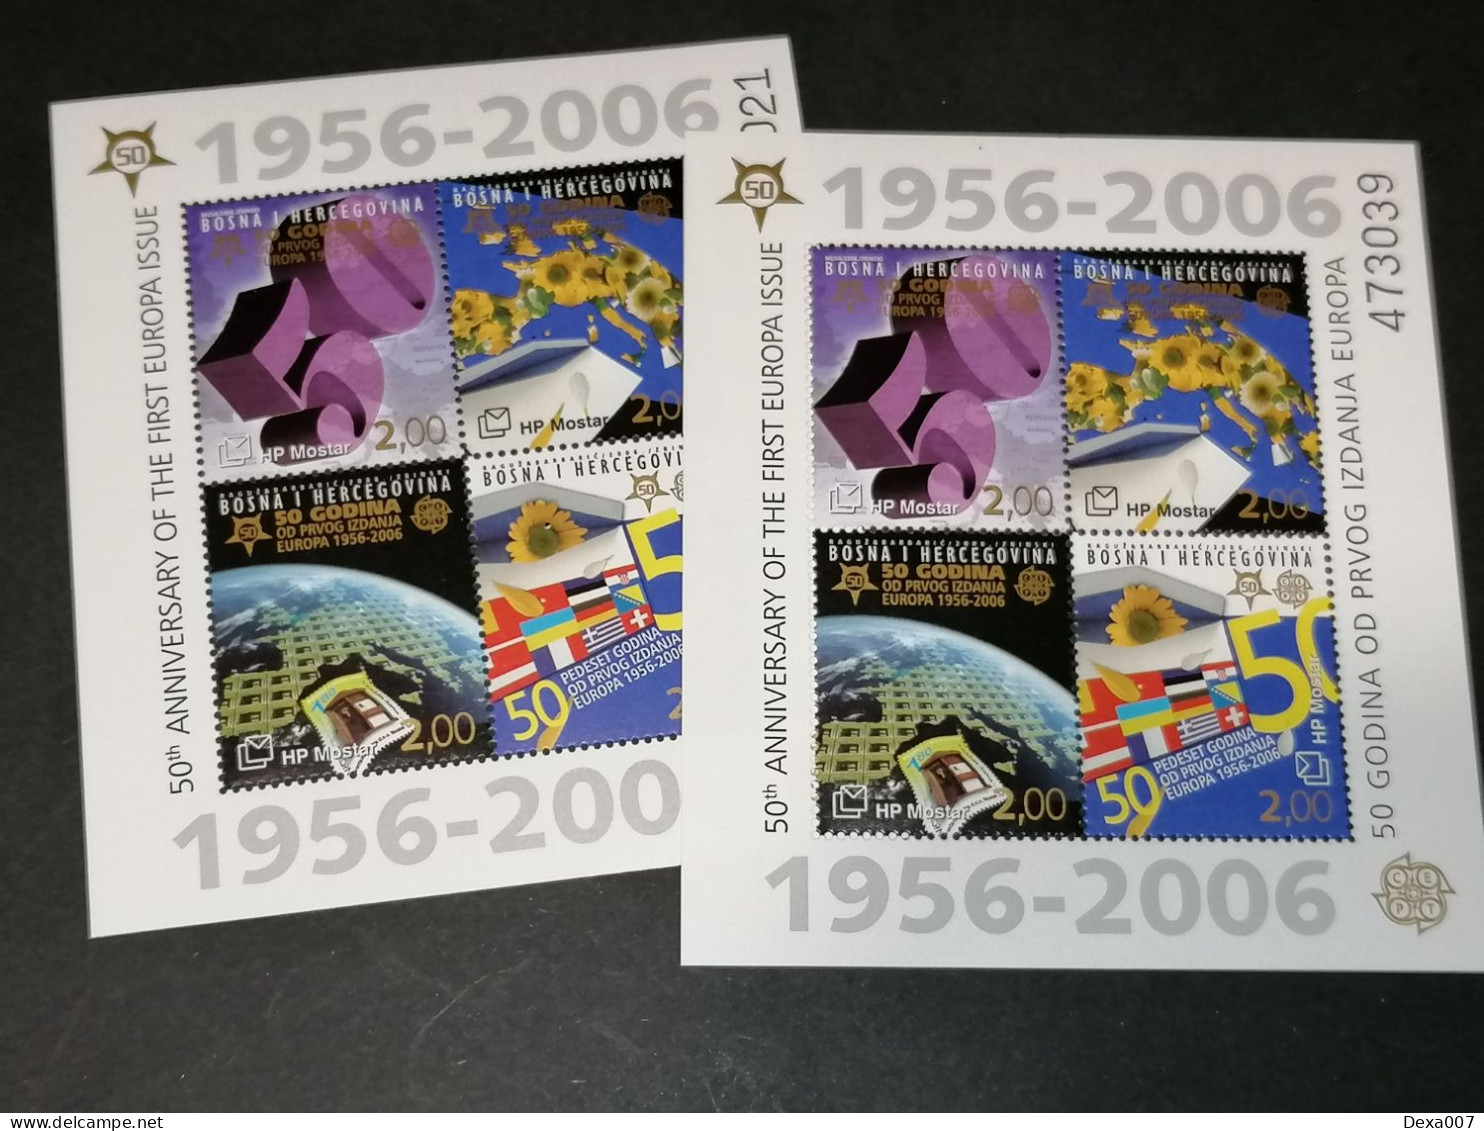 Large envelope ultra top world minisheets all MNH high catalogue value Michel 2000+ euro see photos